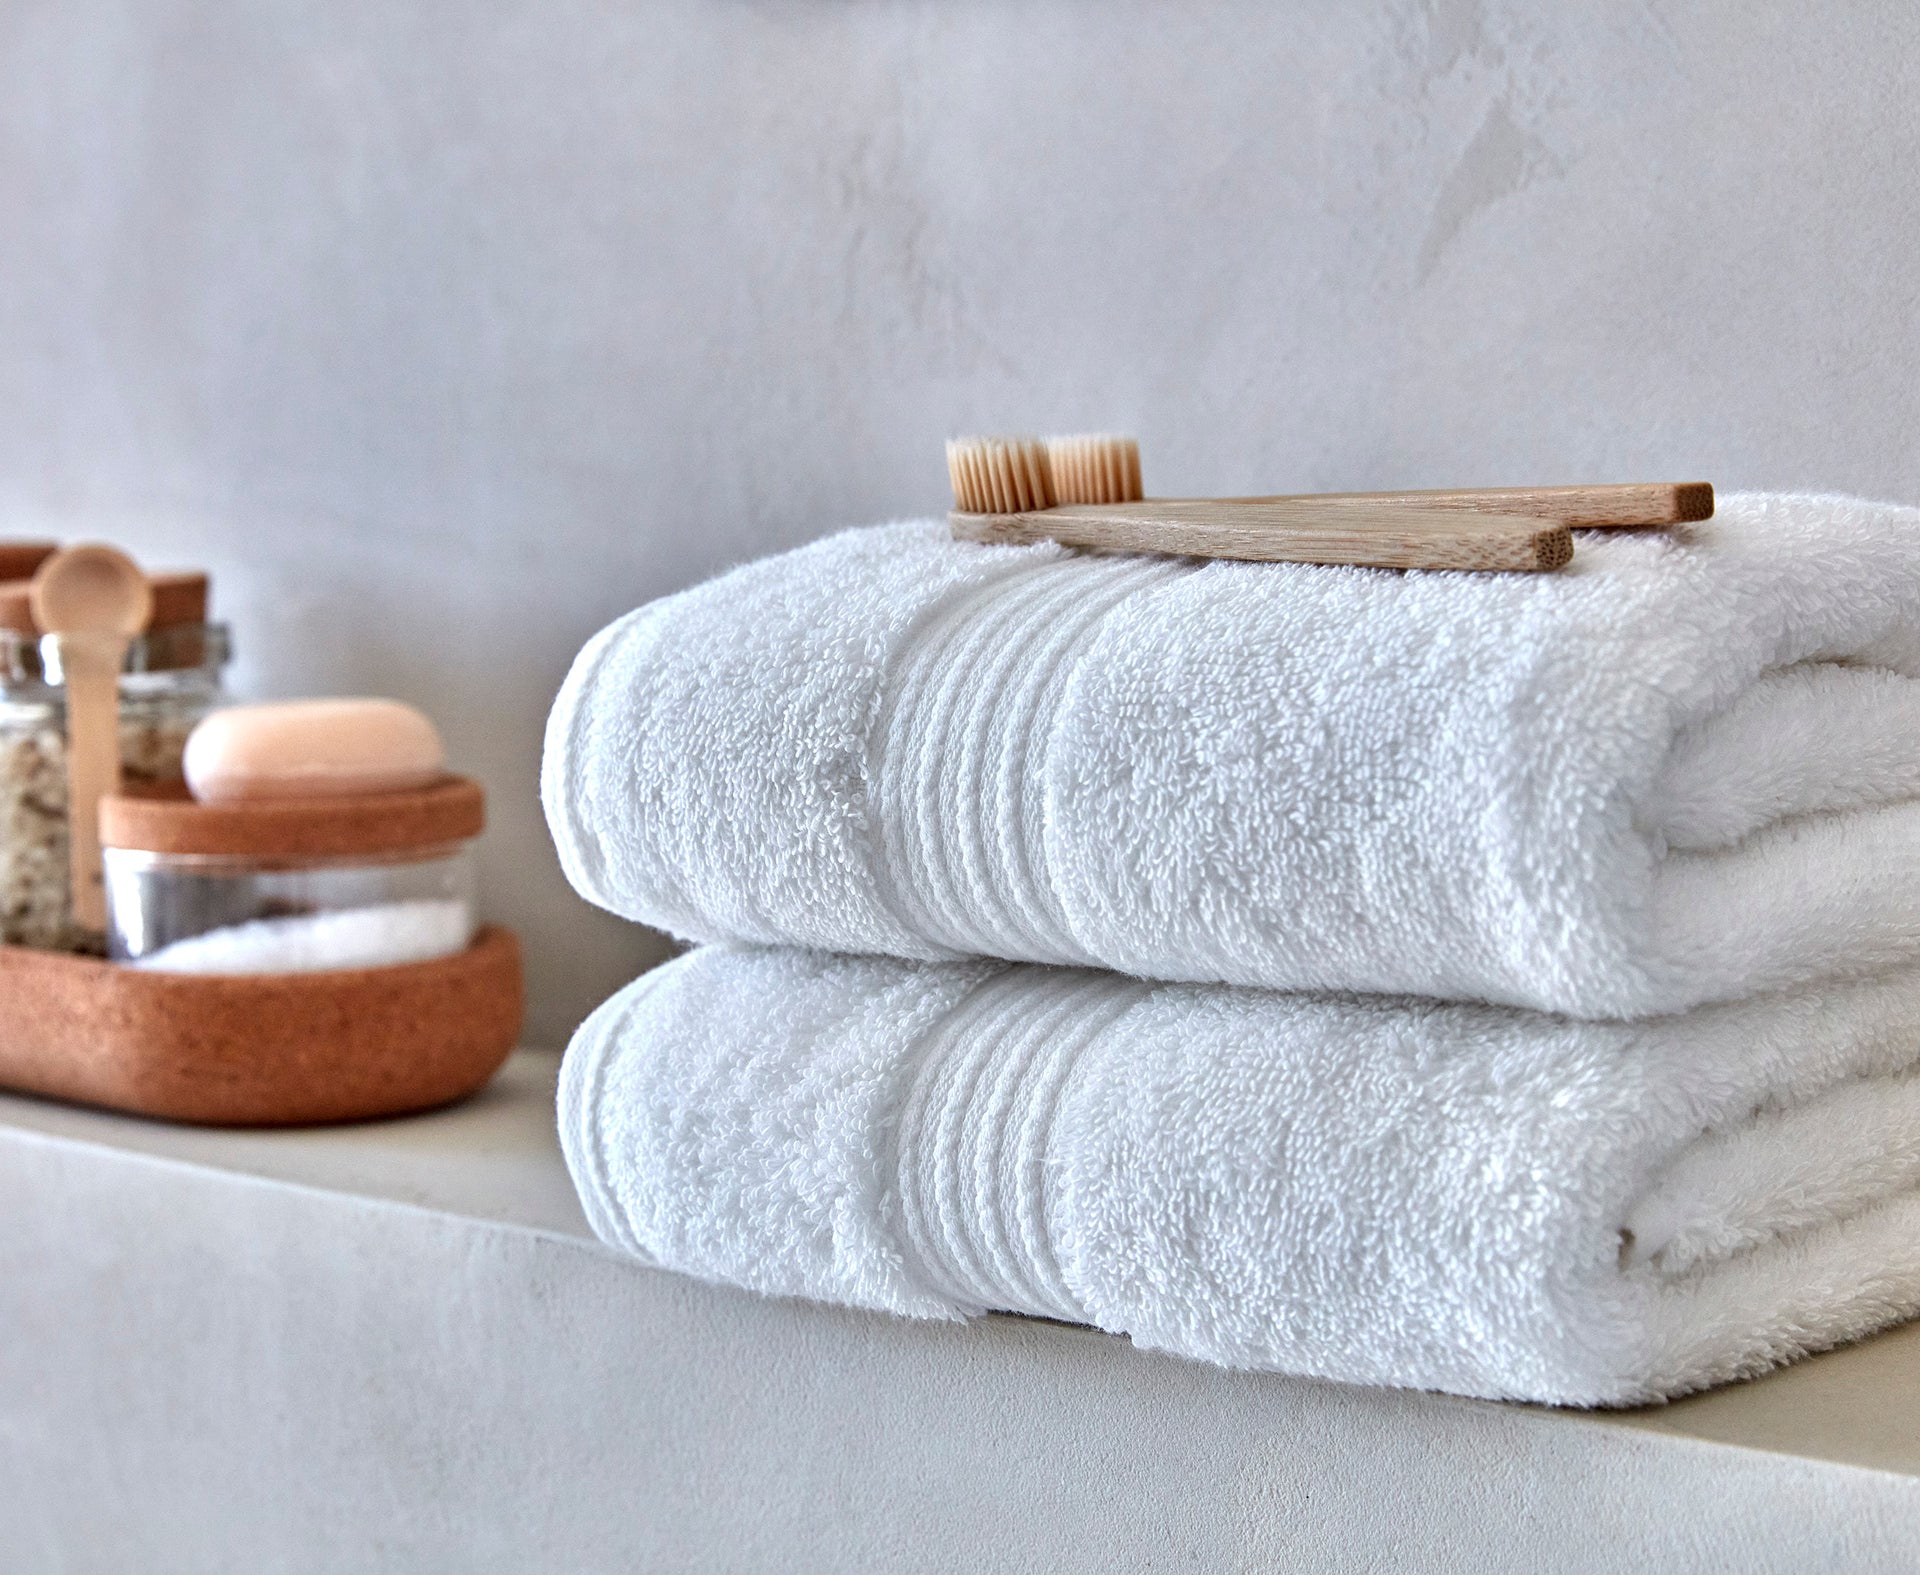 5 tips for selecting the best towels for hotels - Hotel supplies